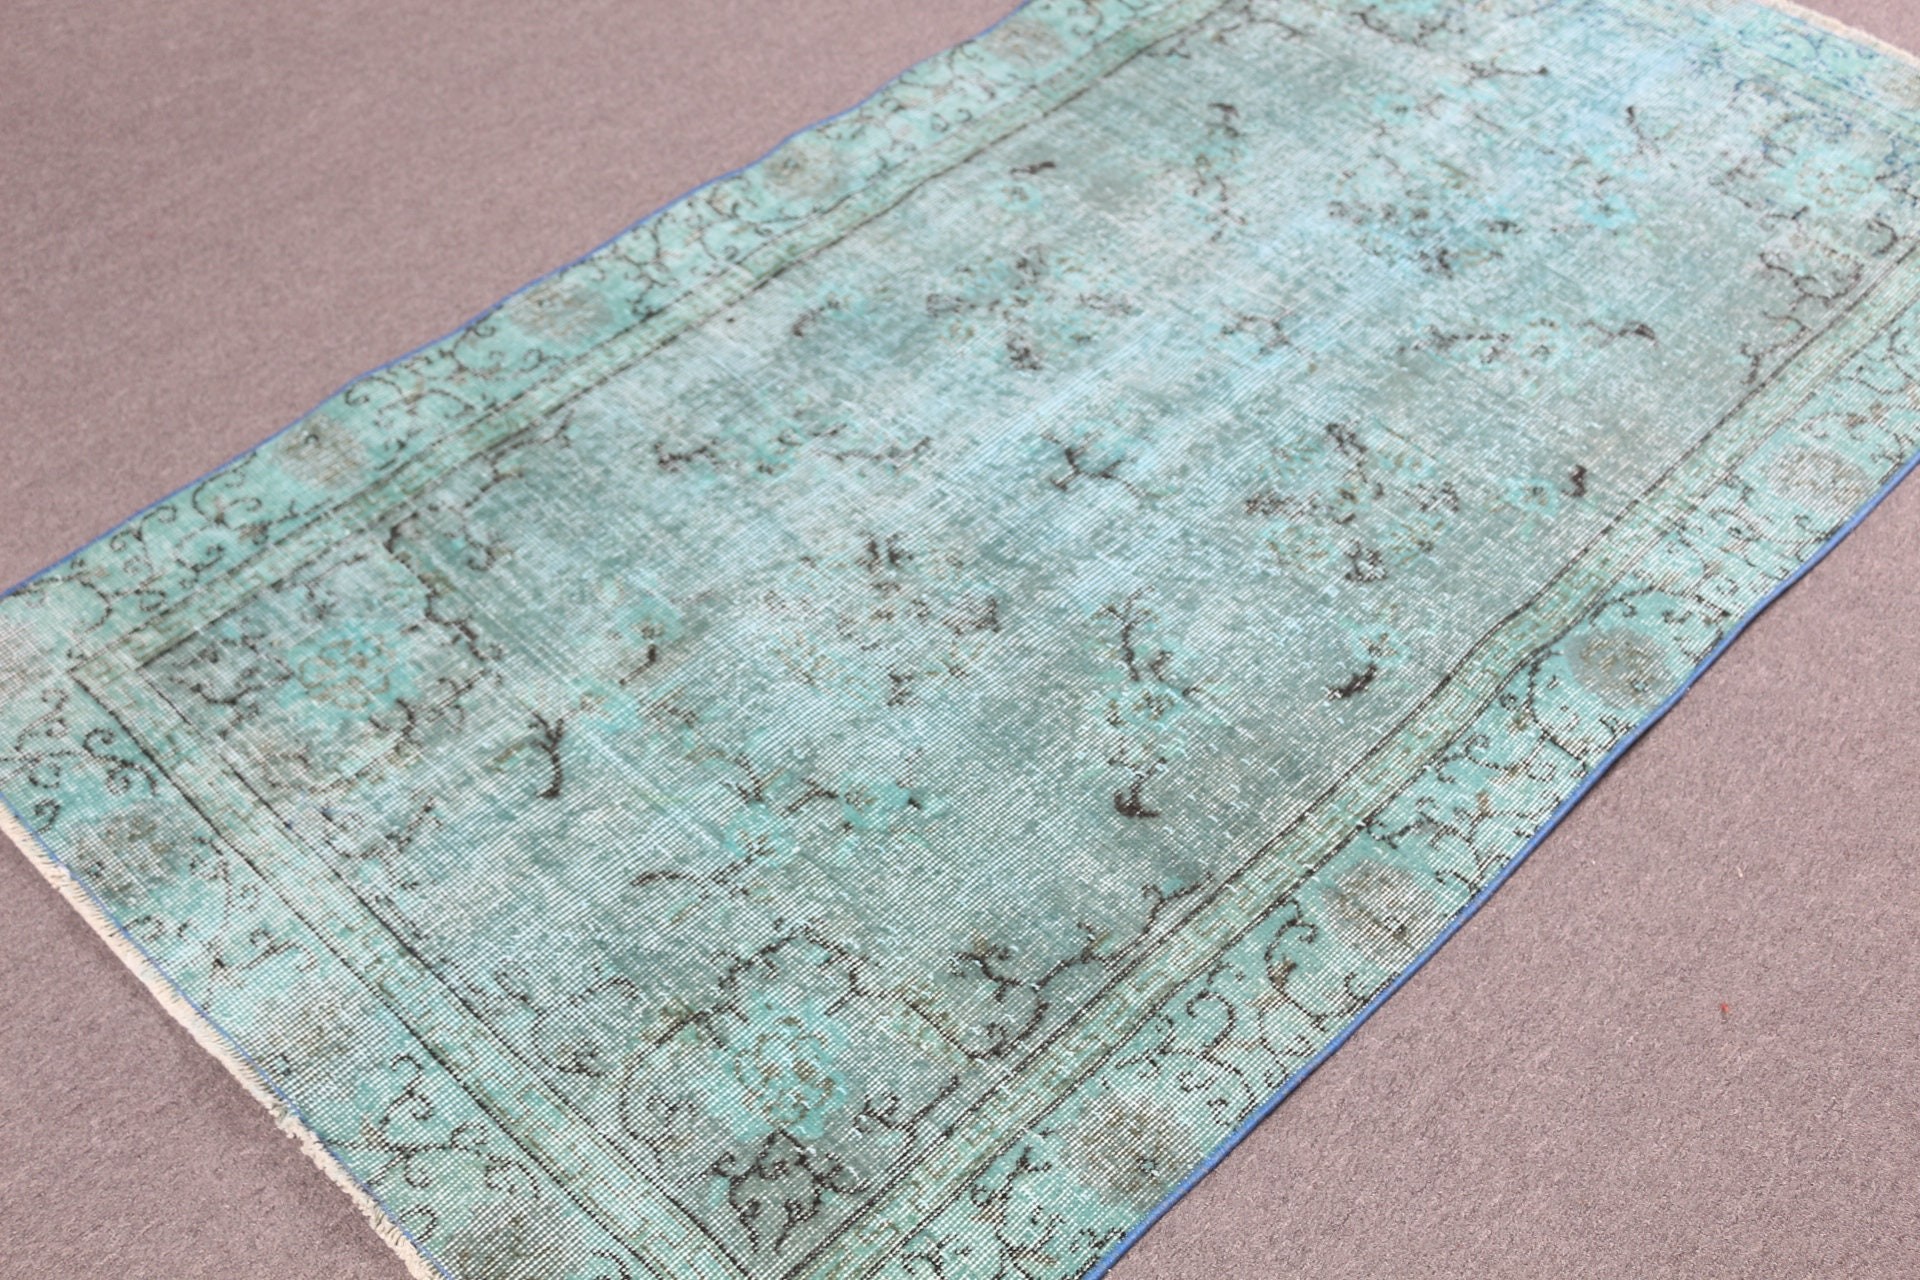 Vintage Rug, Turkish Rugs, Kitchen Rugs, Entry Rug, 3.6x6.6 ft Accent Rug, Nursery Rugs, Home Decor Rugs, Green Cool Rugs, Natural Rugs